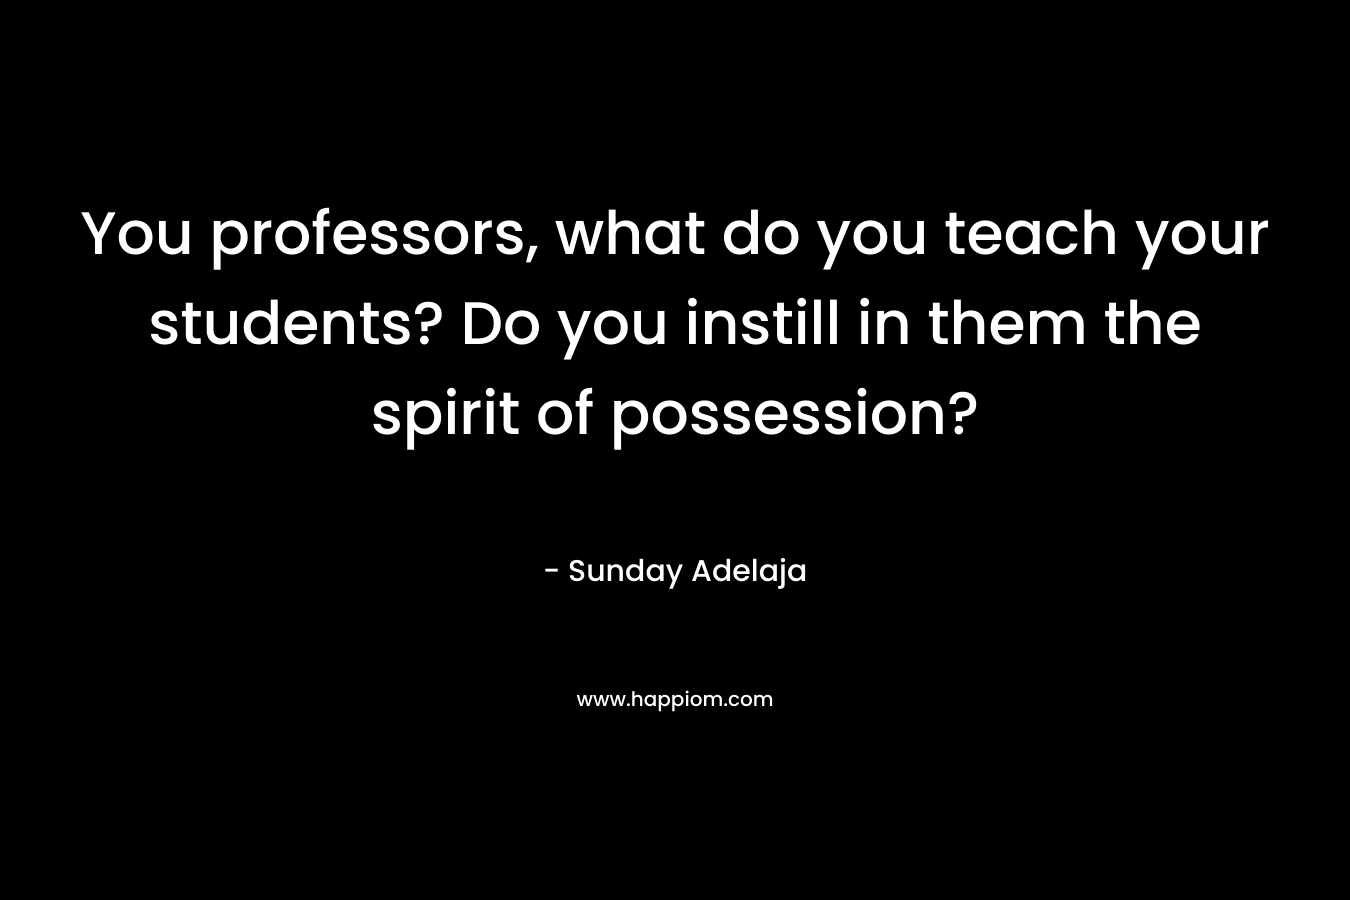 You professors, what do you teach your students? Do you instill in them the spirit of possession?